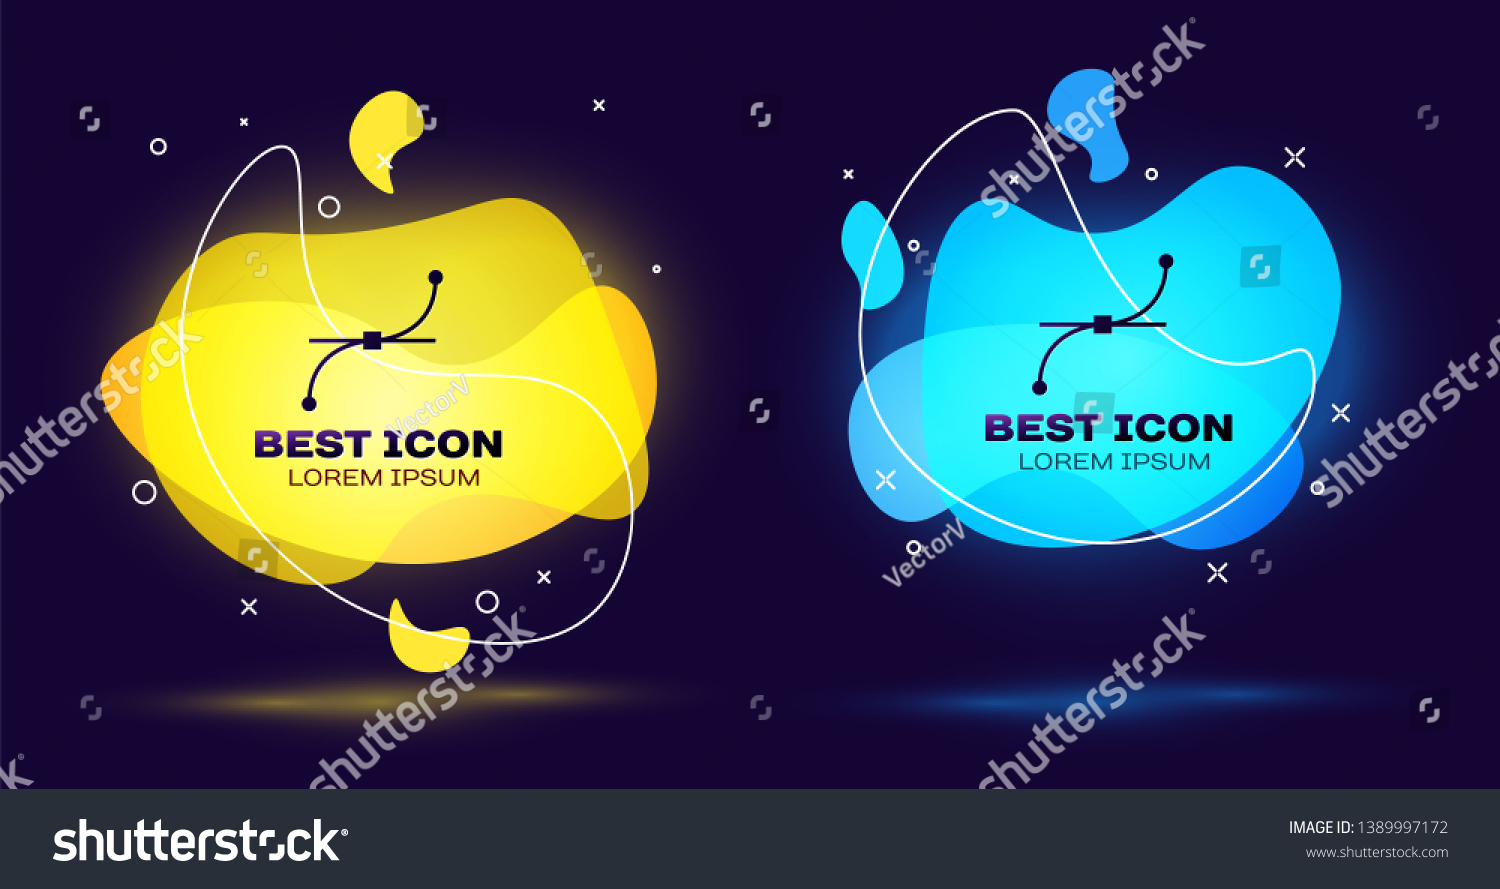 SVG of Black Bezier curve icon isolated. Pen tool icon. Set of liquid color abstract geometric shapes. Vector Illustration svg